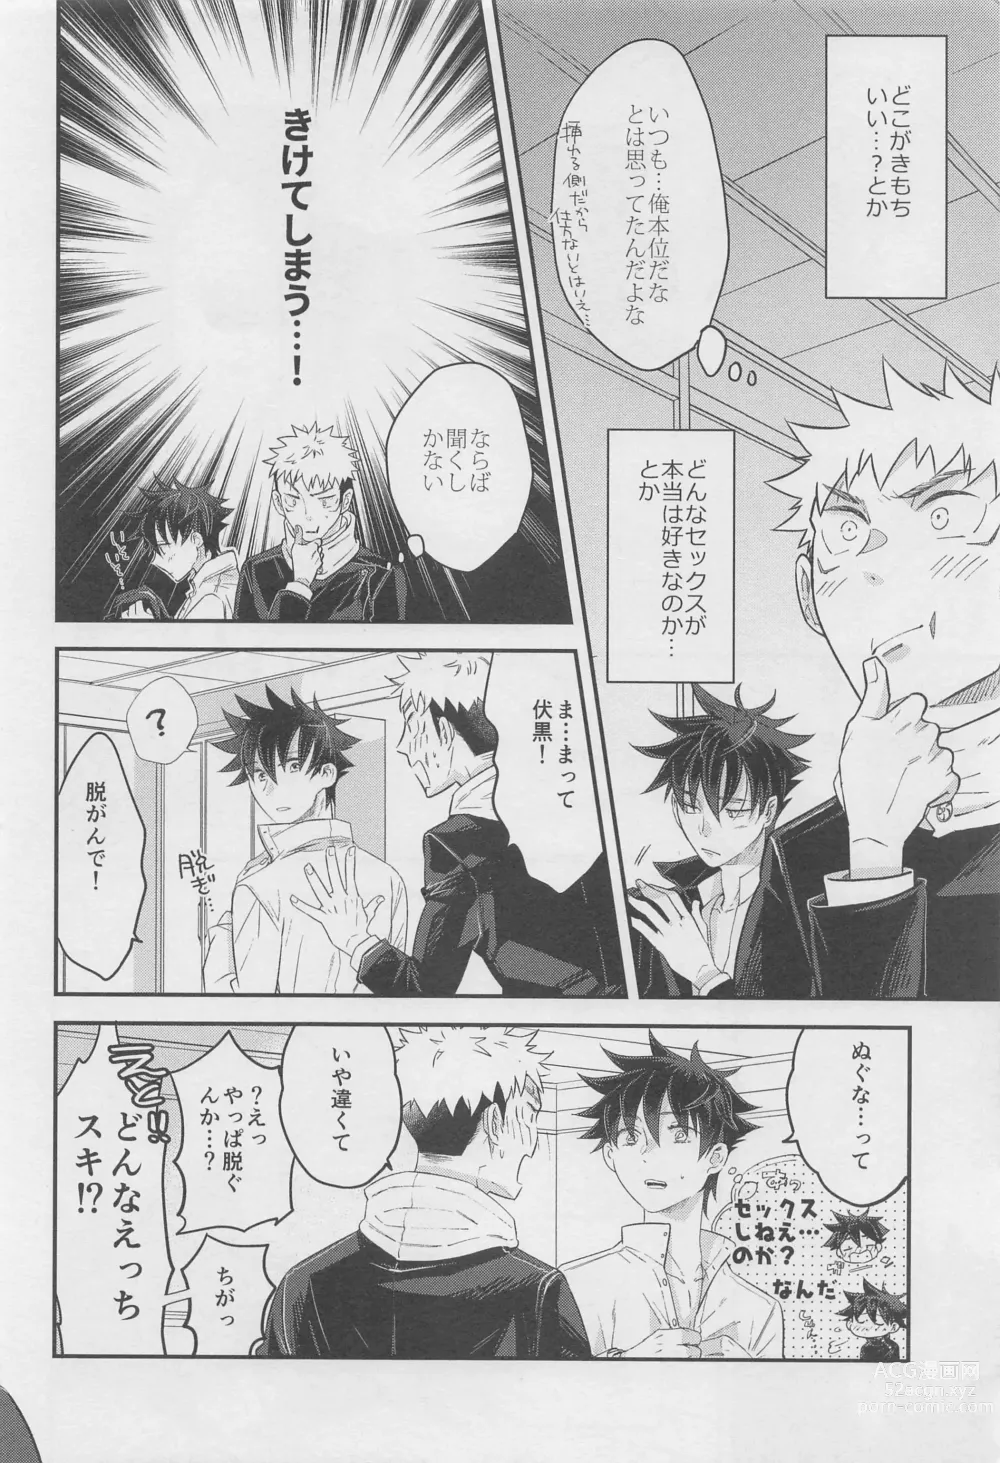 Page 13 of doujinshi Honne  Megane to Kimi to Boku - Will you show me how you really fell about me?